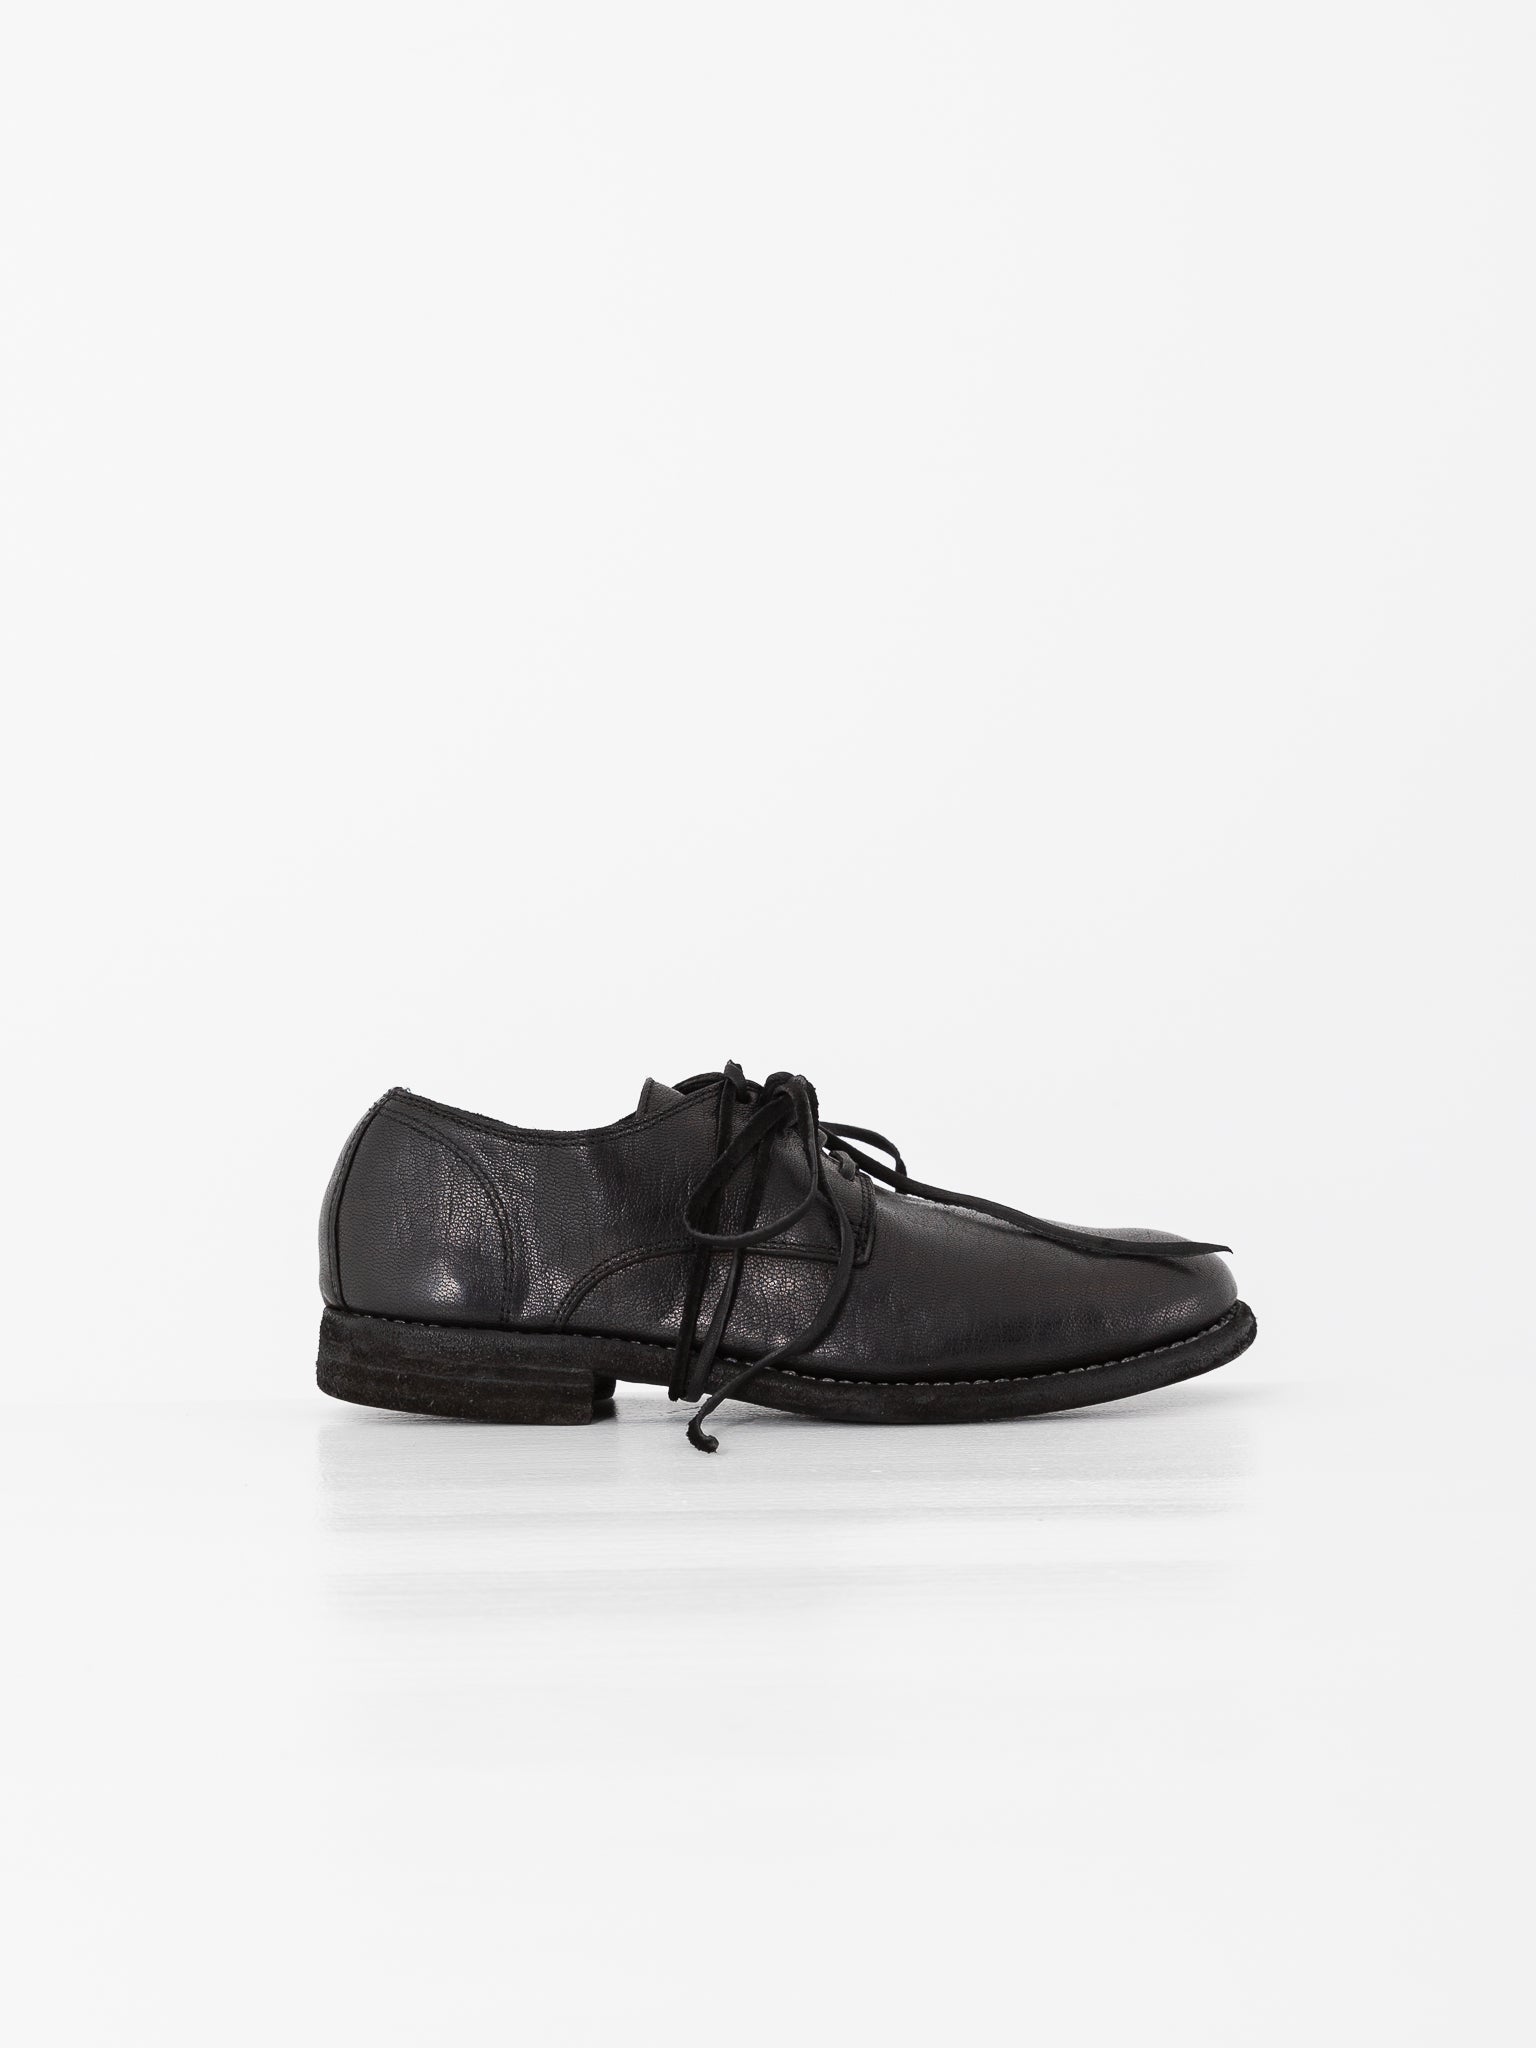 Guidi Classic Derby 992MS, Black - Worthwhile